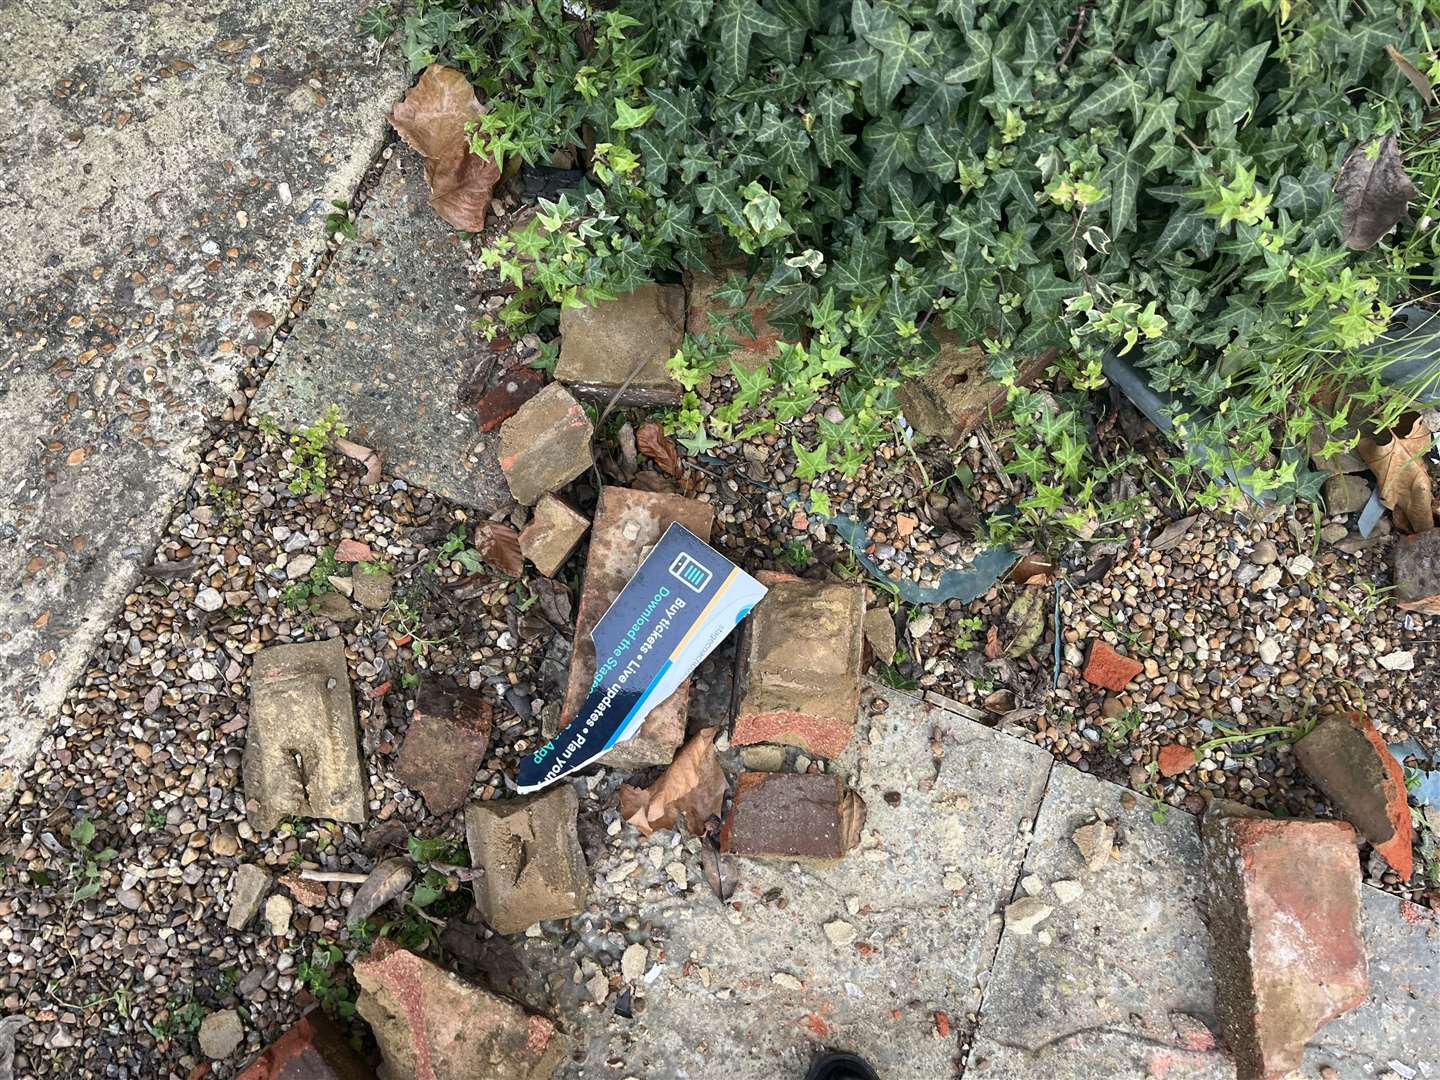 Bits from the bus stop have been left in the rubble in the house's front garden